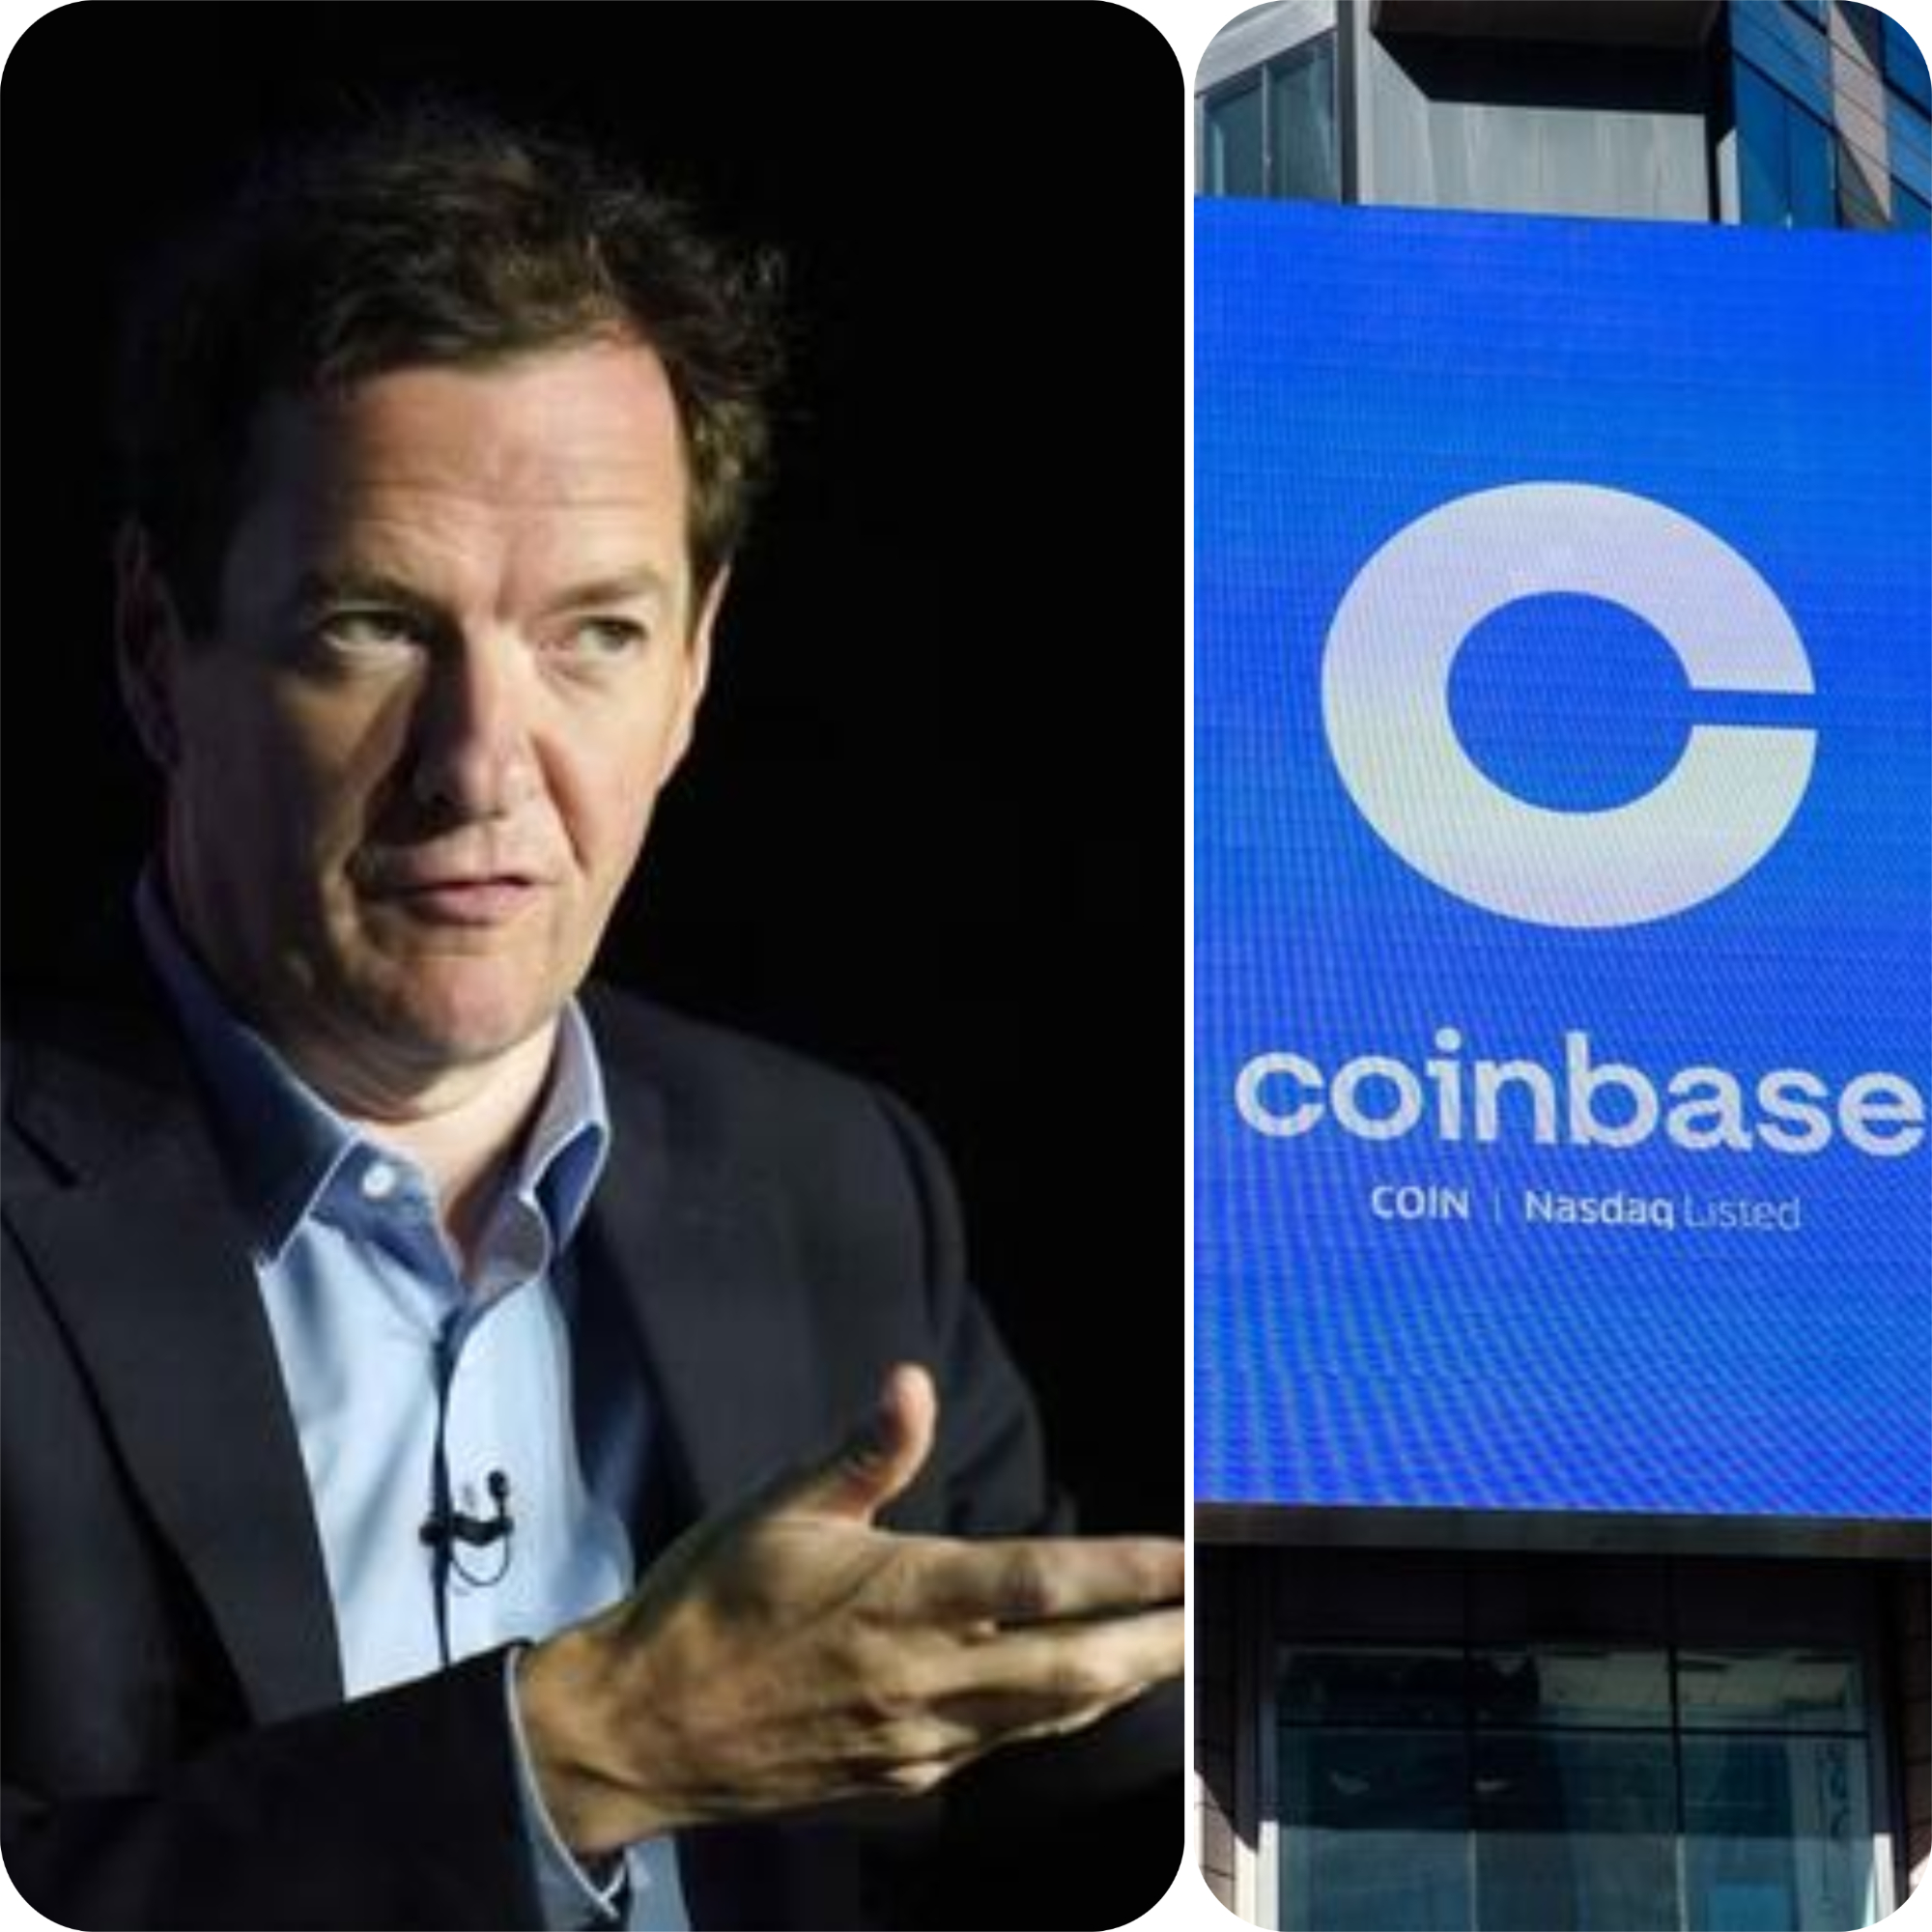 Coinbase has appointed former UK Chancellor George Osborne